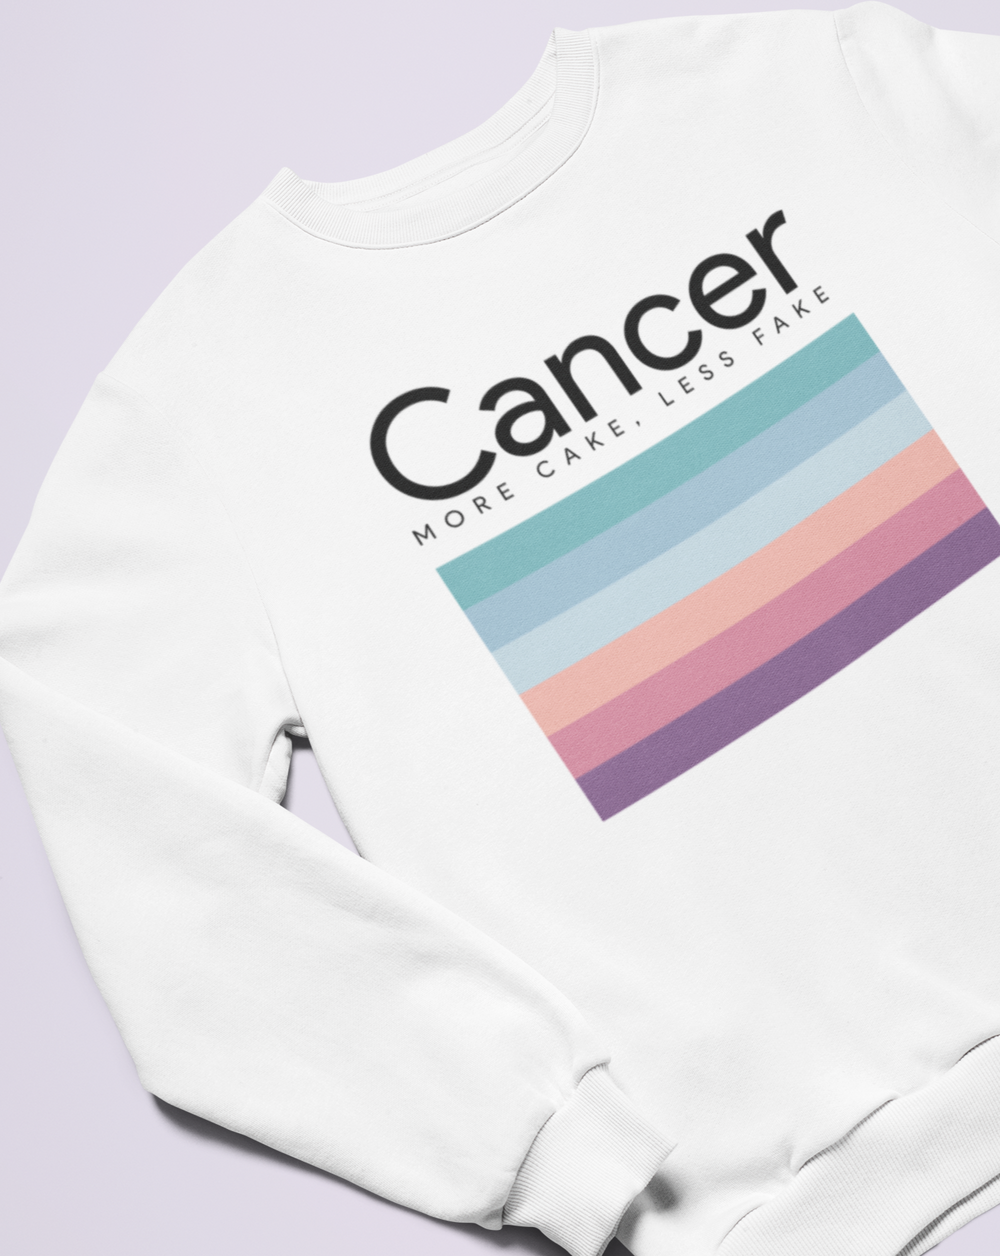 We are CANCER Sweater - TalkPeng